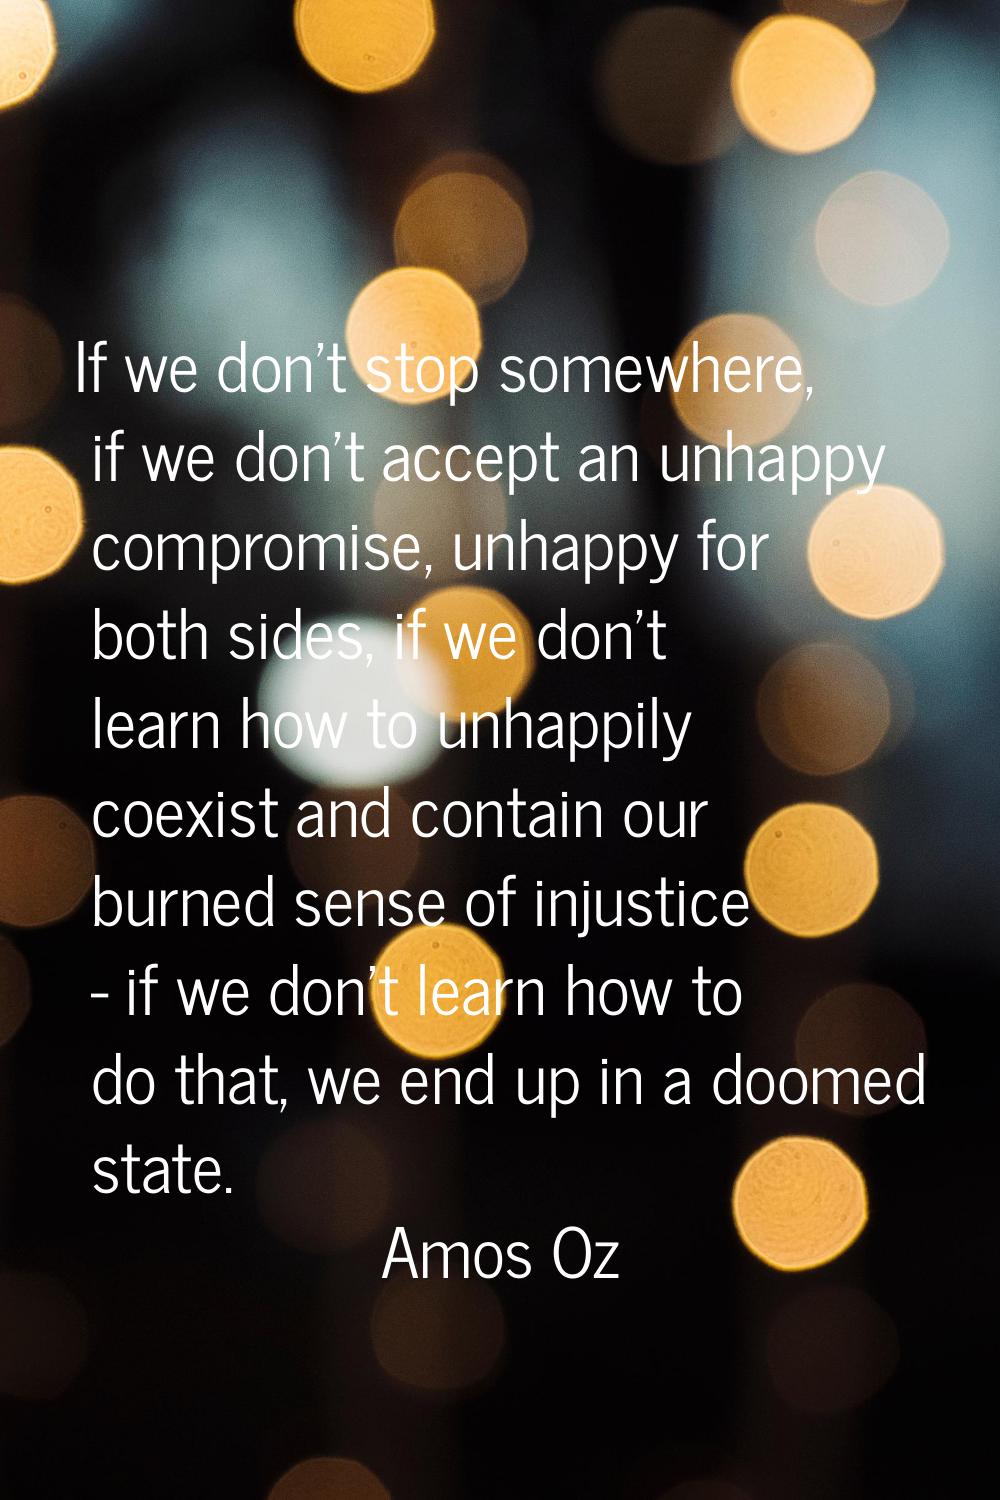 If we don't stop somewhere, if we don't accept an unhappy compromise, unhappy for both sides, if we